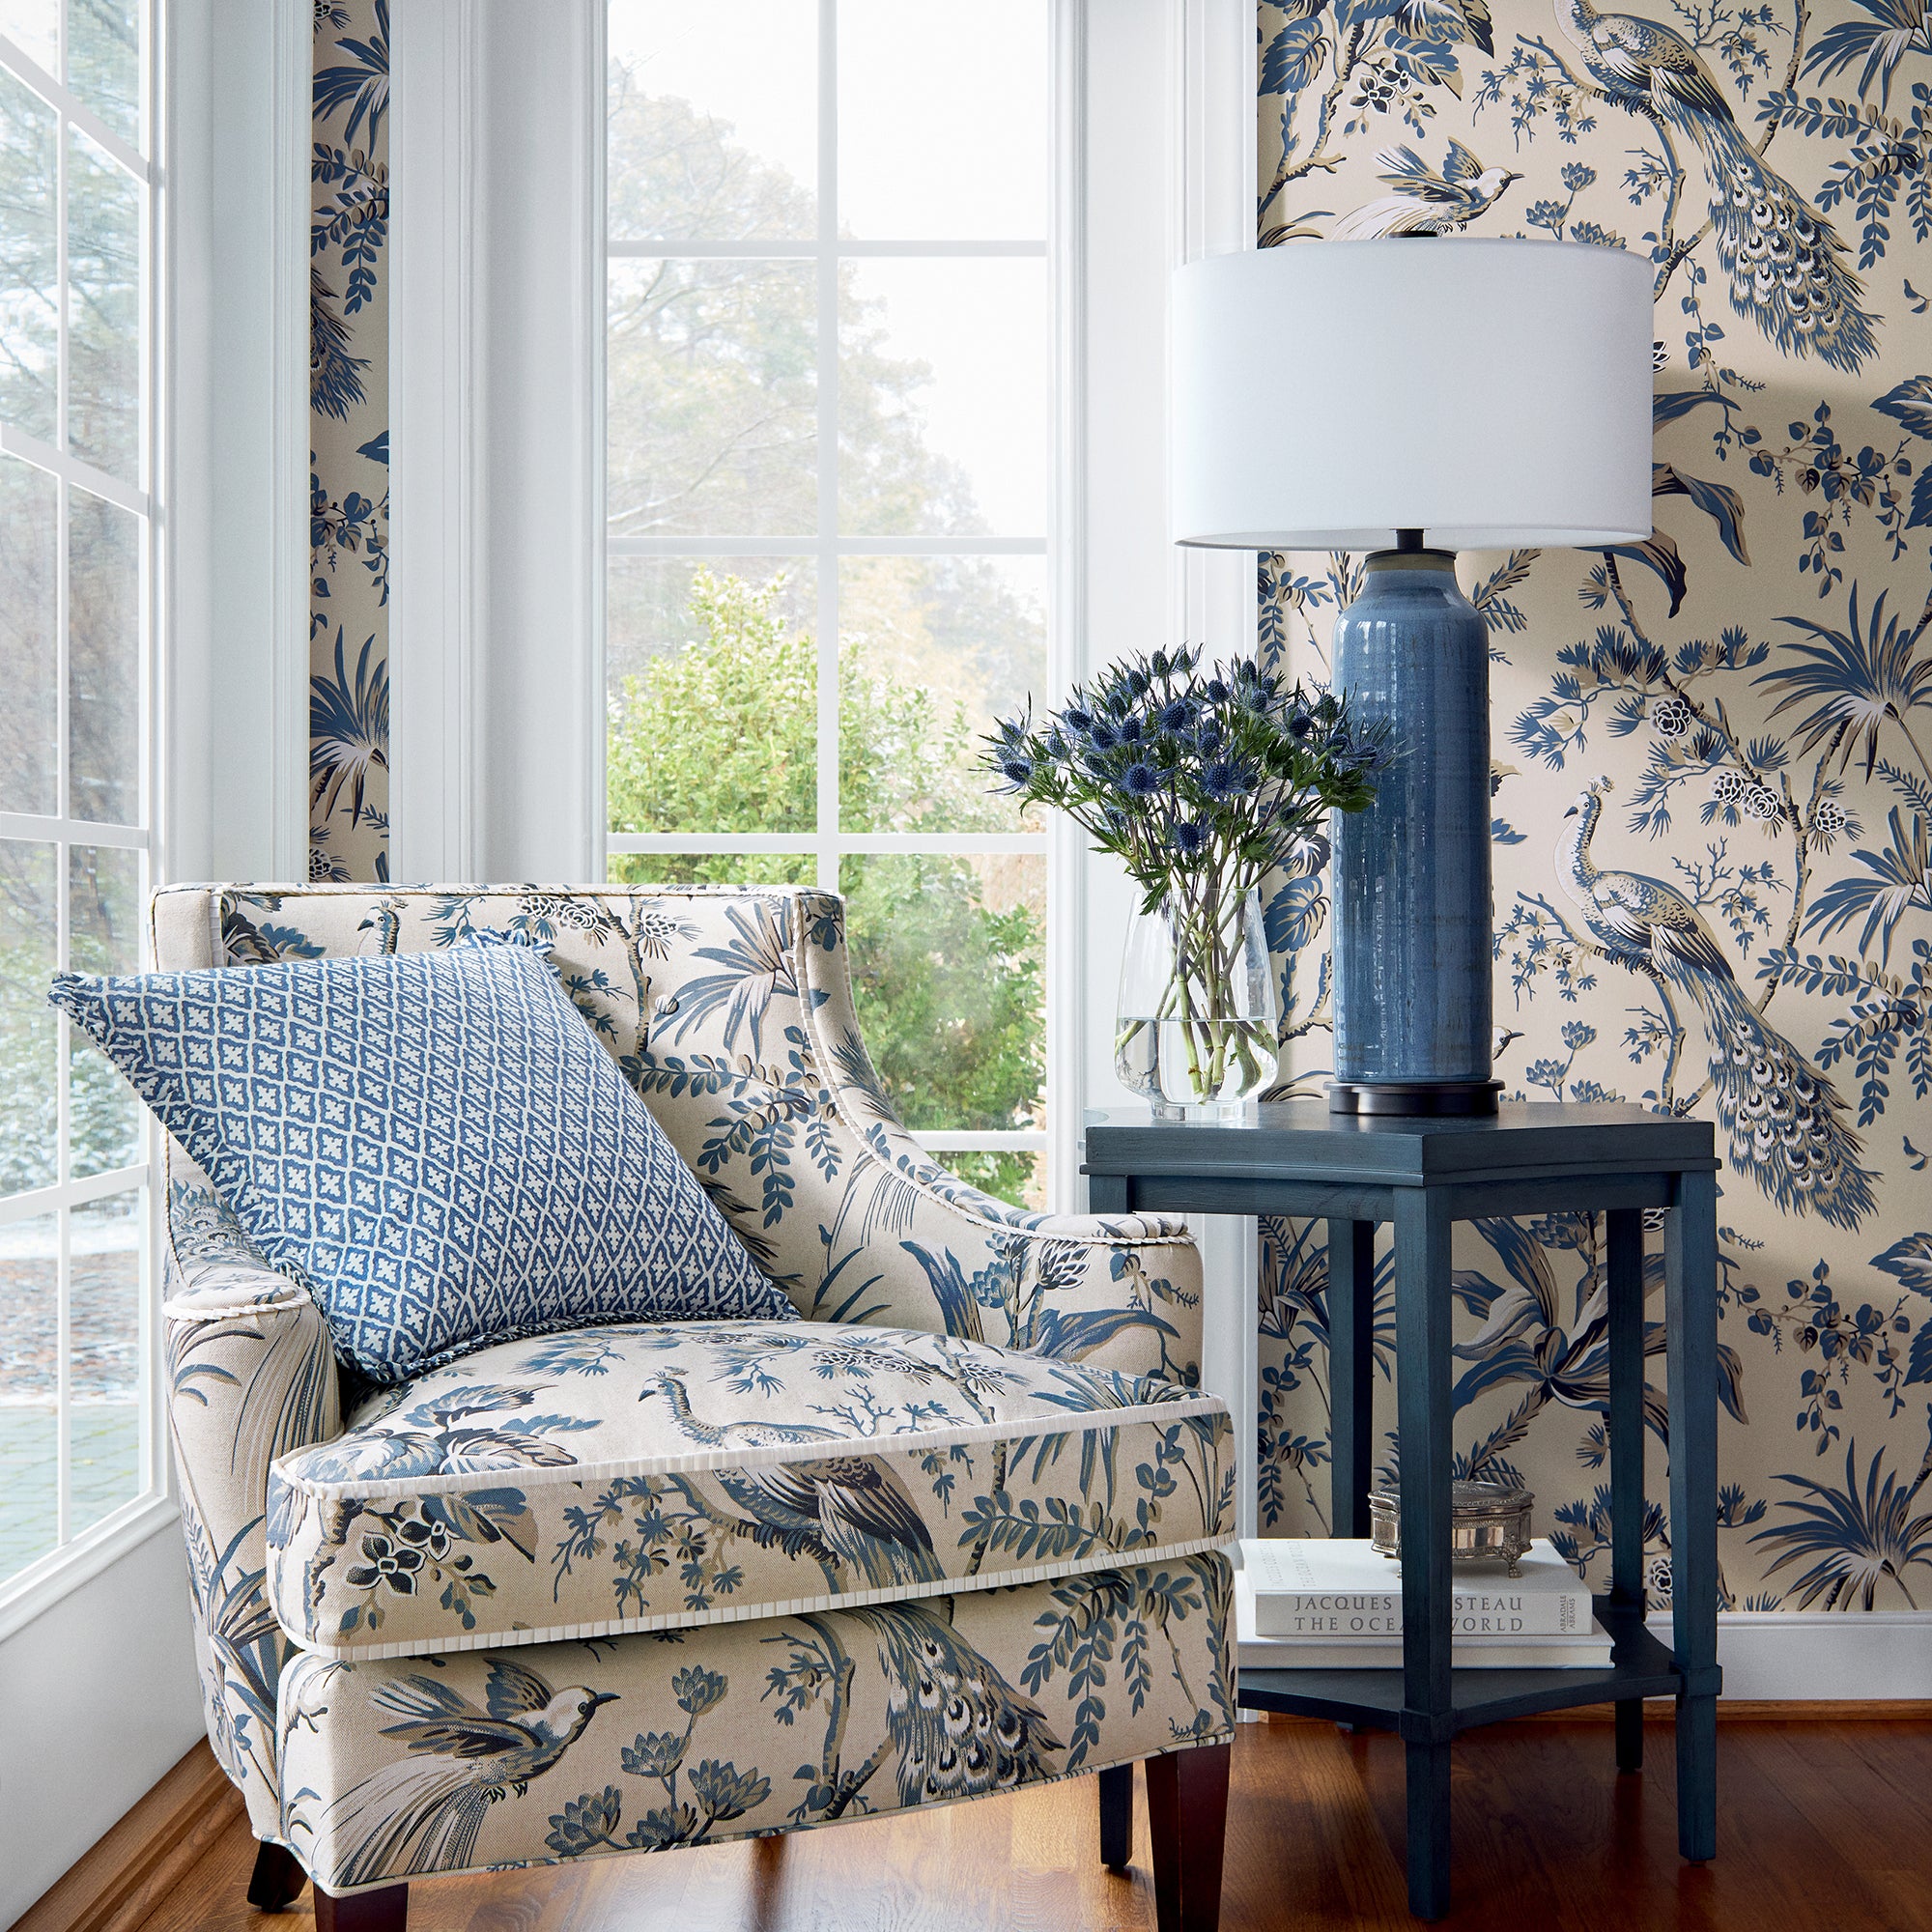 Emerson Chair in Peacock Toile printed fabric in slate and black color - pattern number AF57833 by Anna French in the Bristol collection